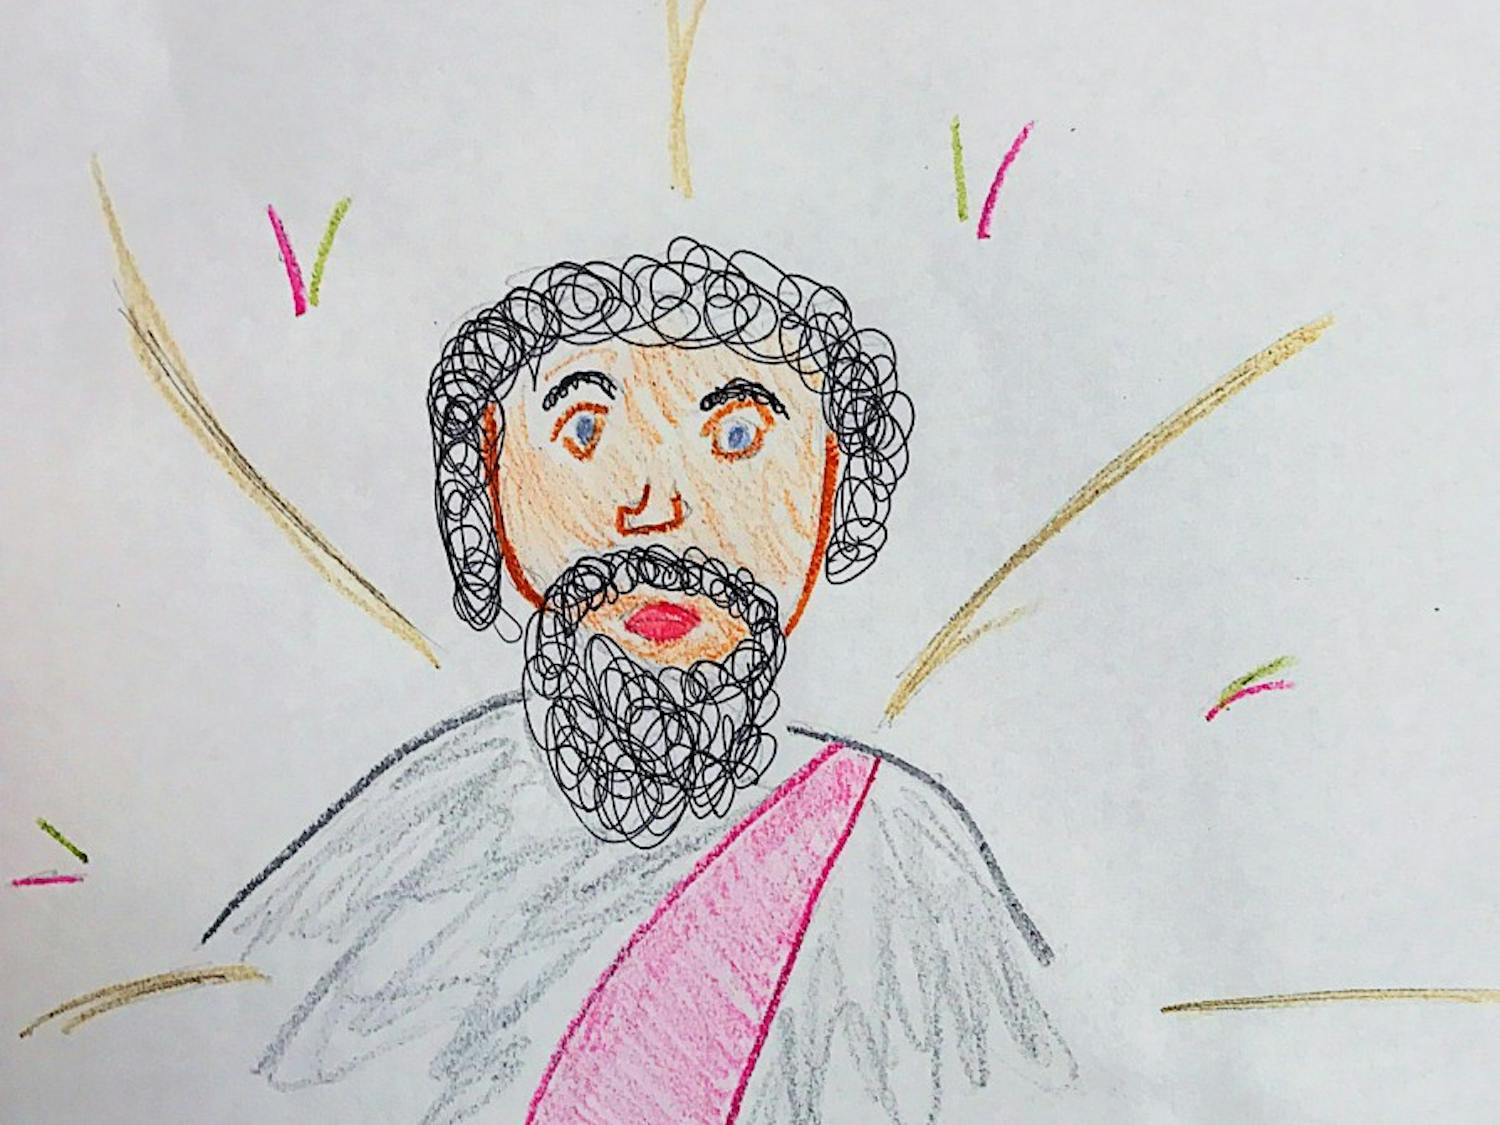 We took to Franklin Street to ask people what they think God looks like. Here are a few of your artistic interpretations.